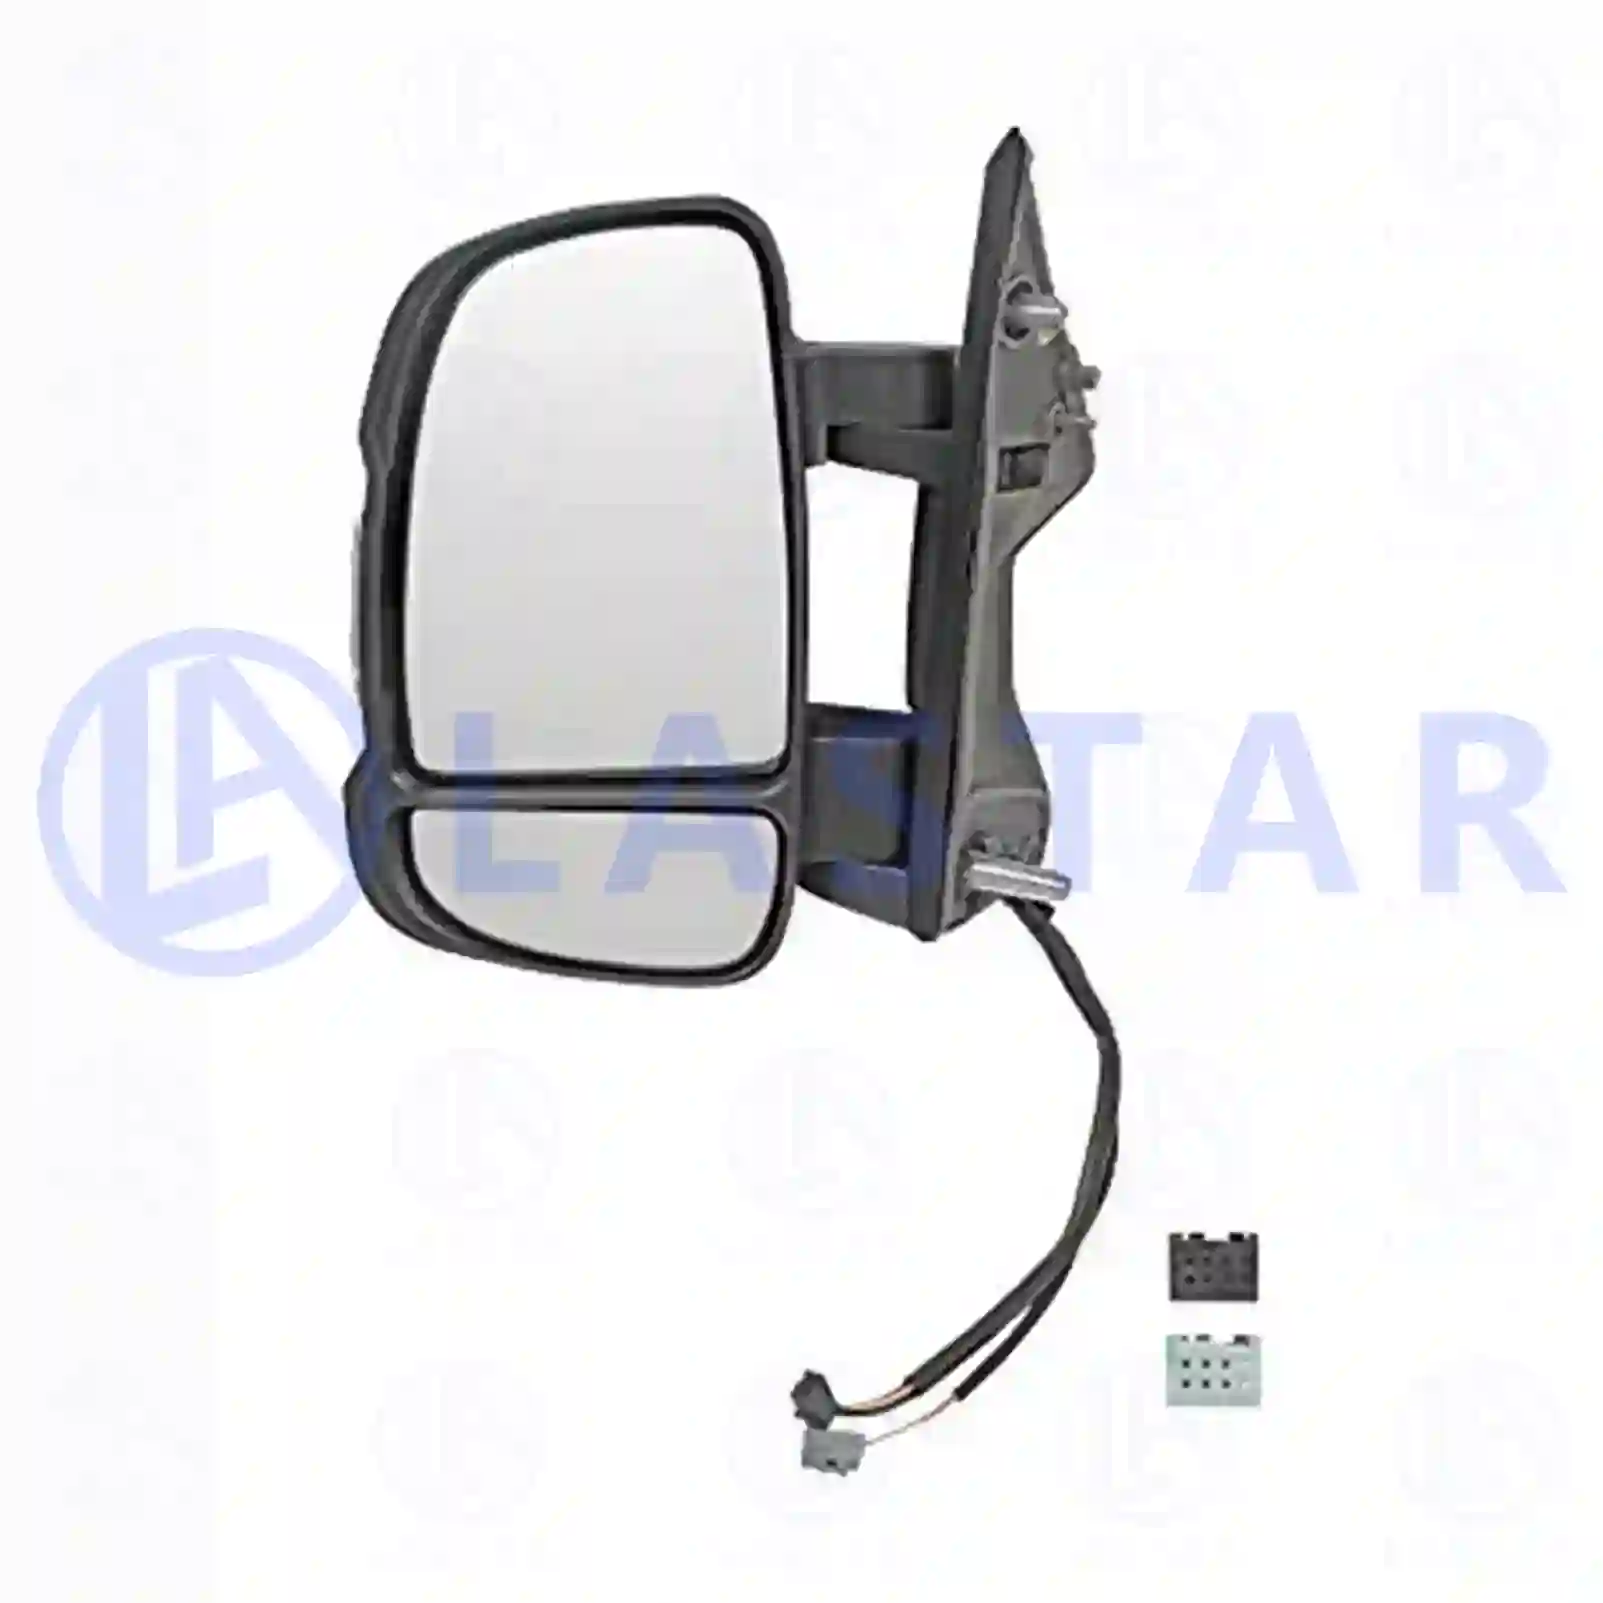 Main mirror, left, heated, electrical, with temperature sensor, 77721379, 1613693180, 8153X8, 8154NC, 735424431, 735440423, 735480699, 735480940, 735517079, 735517089, 735620699, 735620761, 71778683, 1613693180, 8153X8, 8154NC ||  77721379 Lastar Spare Part | Truck Spare Parts, Auotomotive Spare Parts Main mirror, left, heated, electrical, with temperature sensor, 77721379, 1613693180, 8153X8, 8154NC, 735424431, 735440423, 735480699, 735480940, 735517079, 735517089, 735620699, 735620761, 71778683, 1613693180, 8153X8, 8154NC ||  77721379 Lastar Spare Part | Truck Spare Parts, Auotomotive Spare Parts